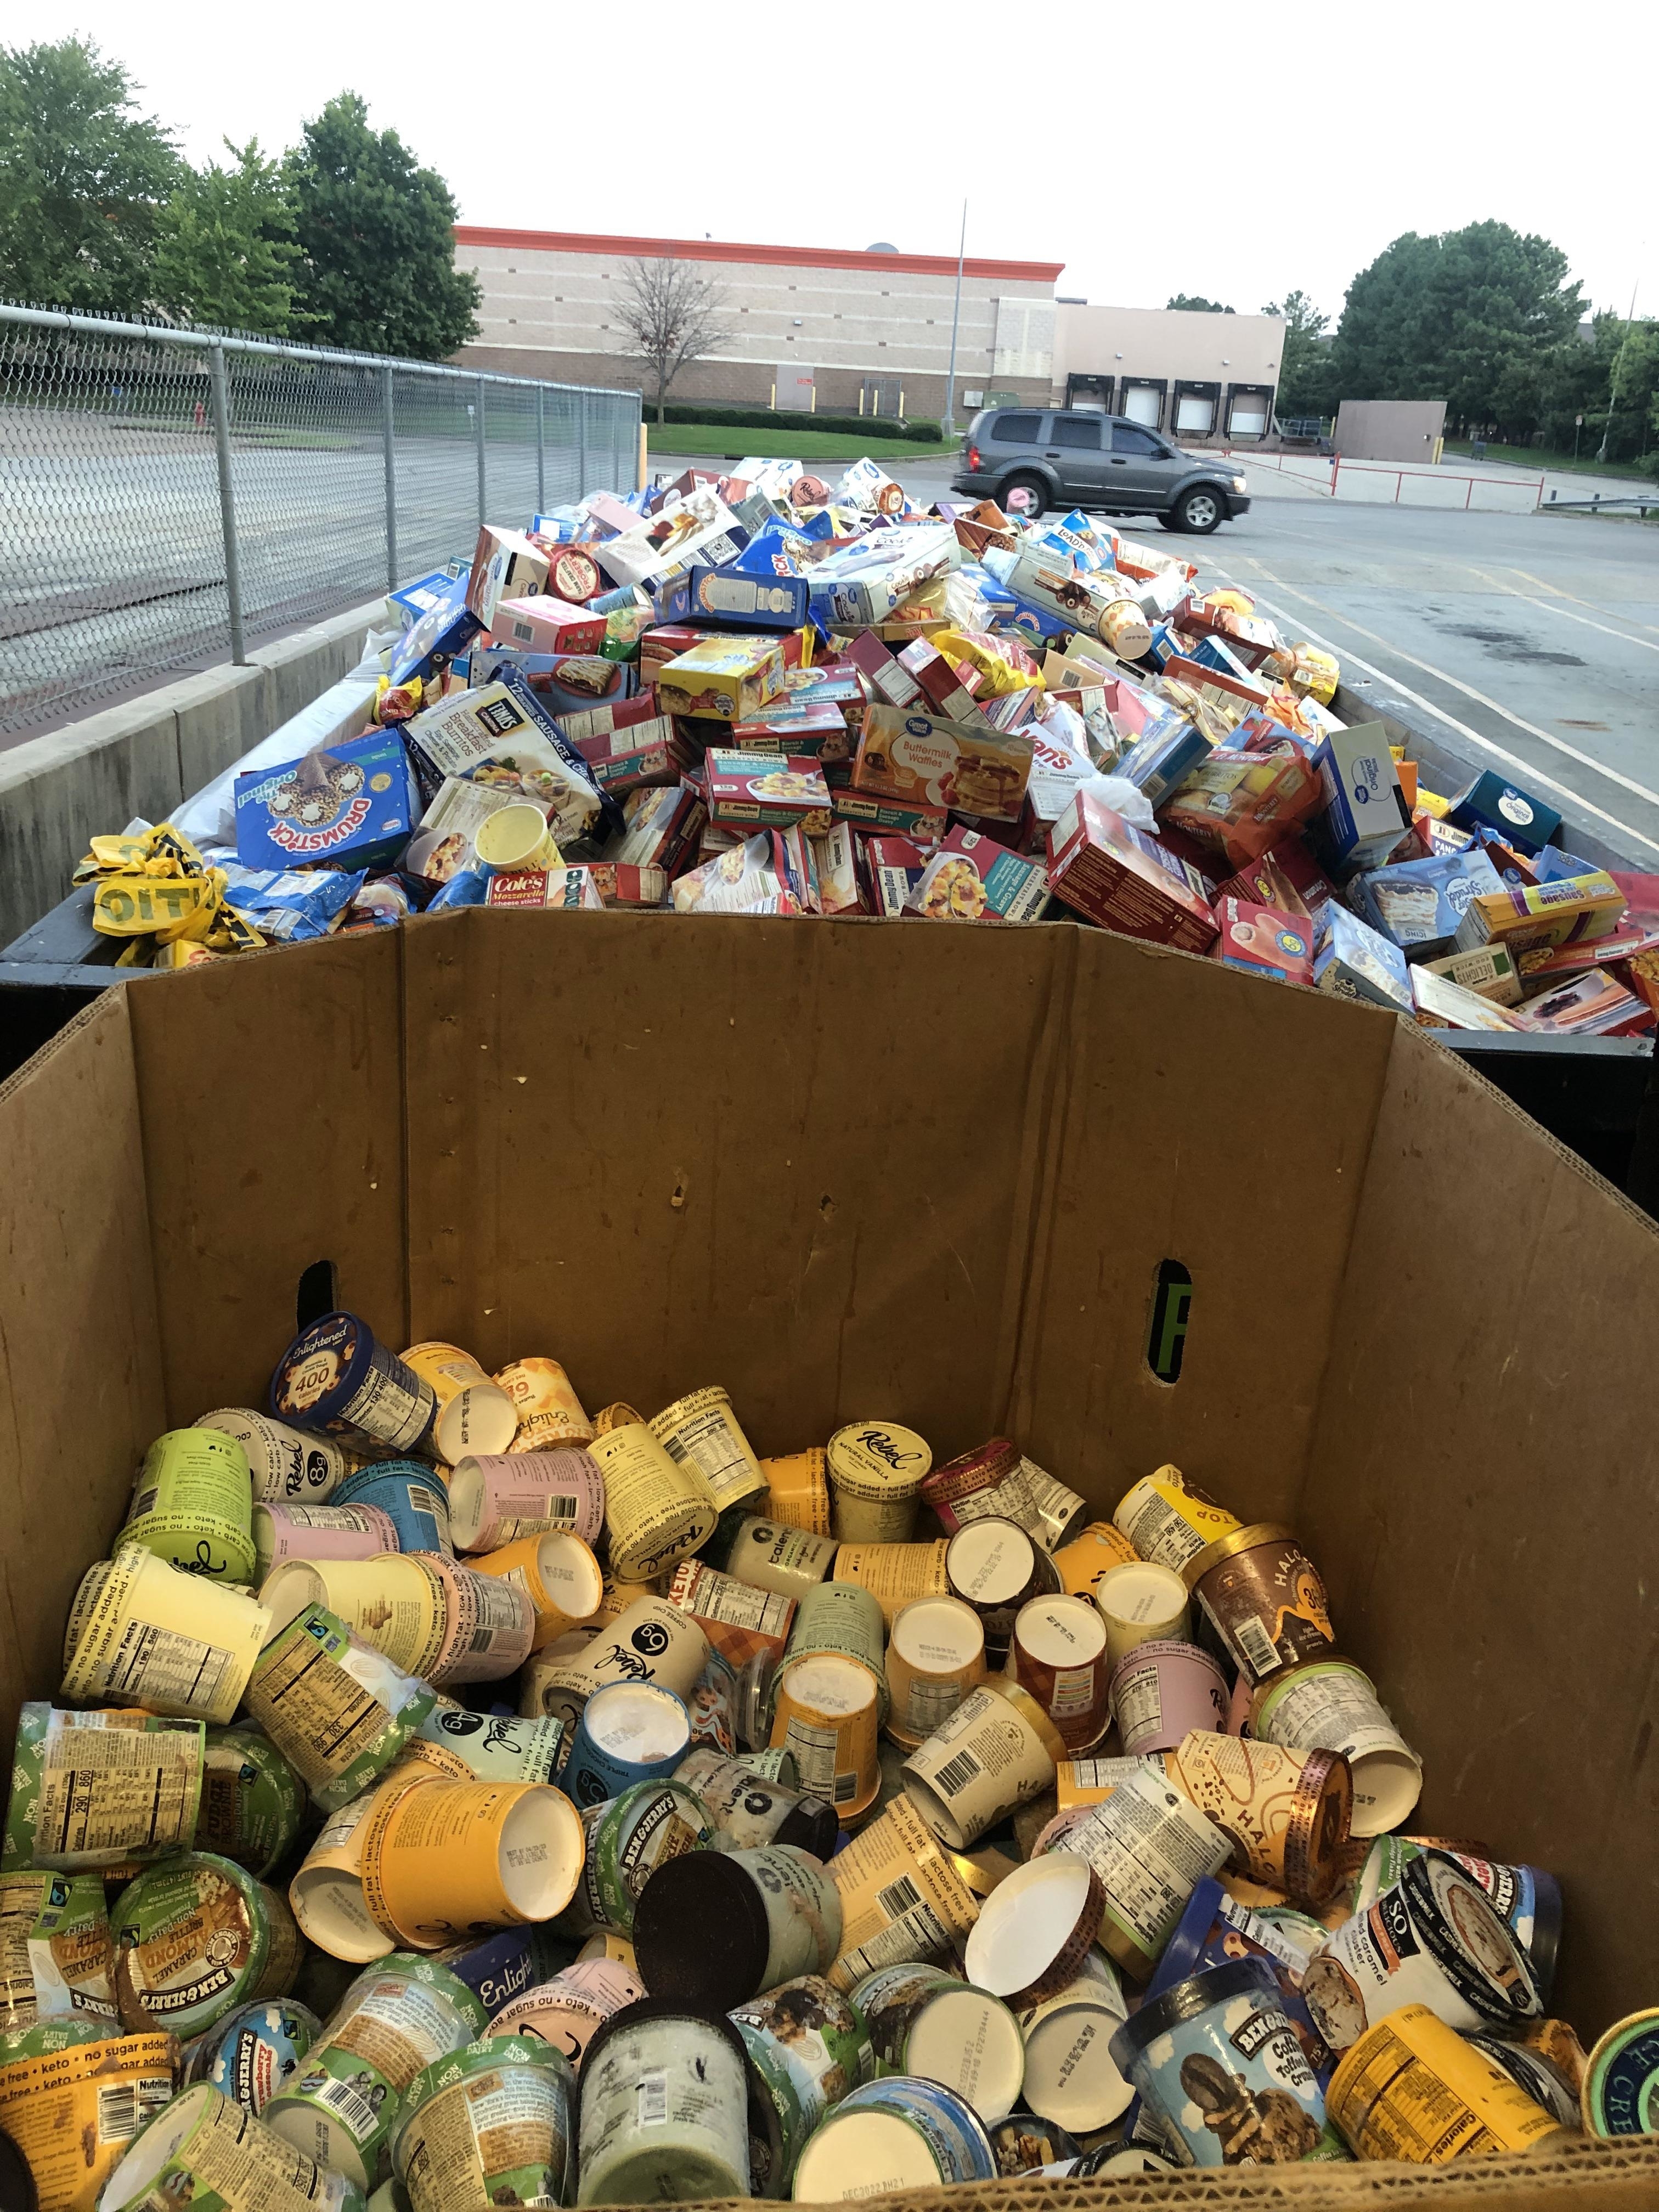 A dumpster overflowing with discarded food items outside a store